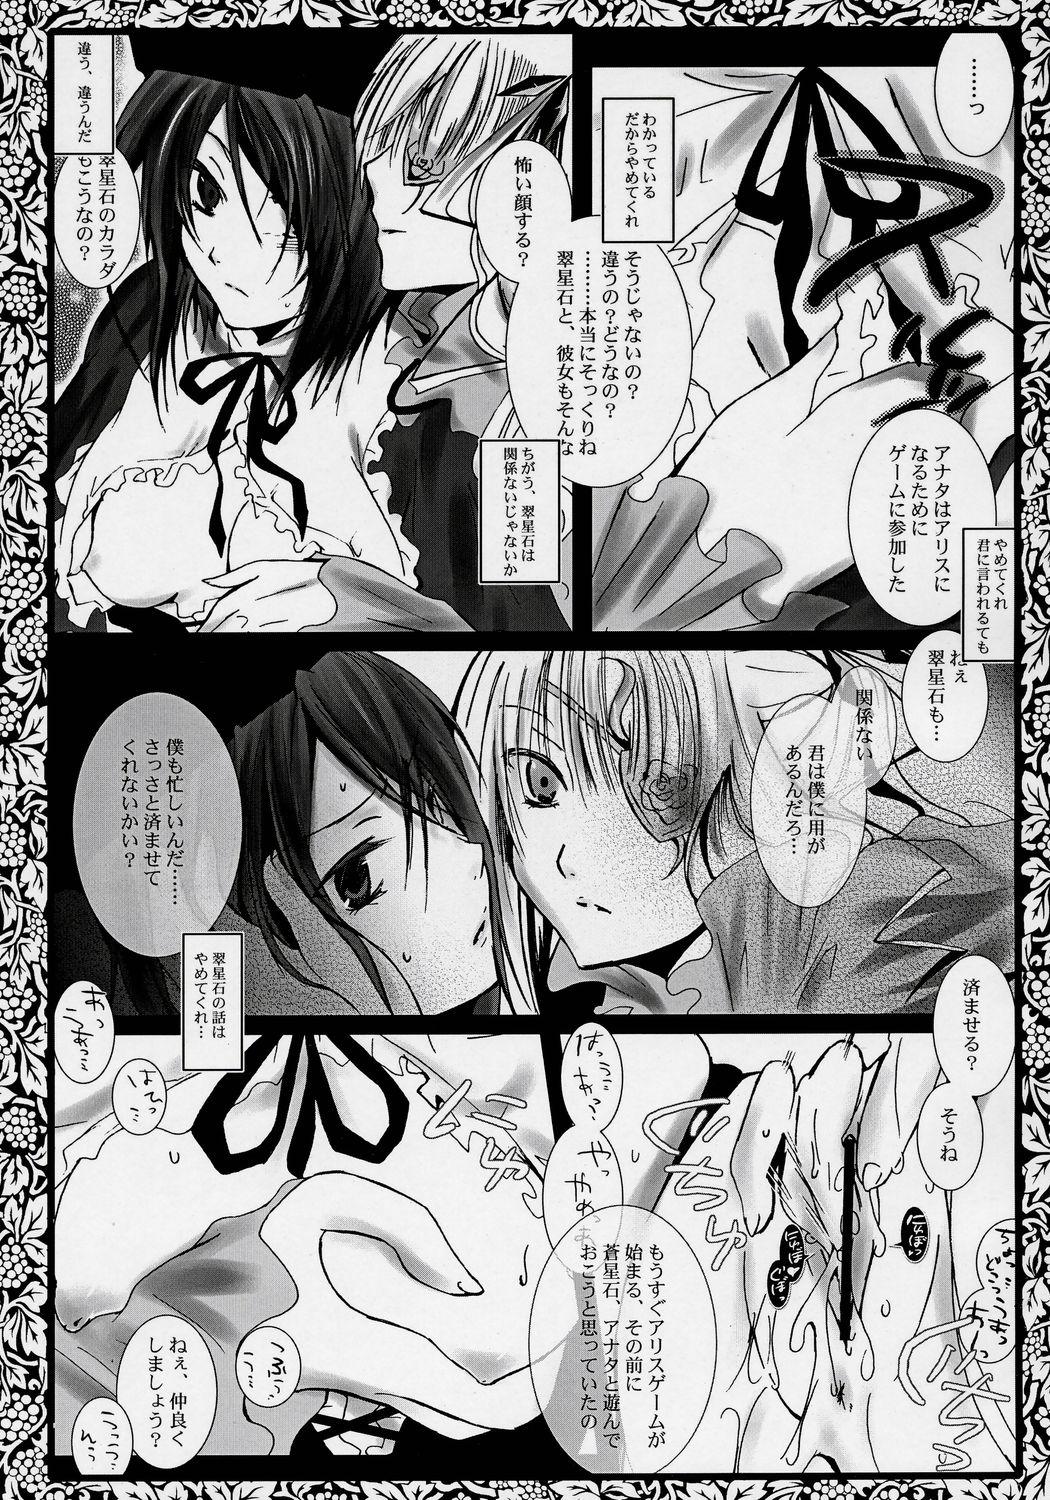 Couch Pupa Lapis - Rozen maiden Glamcore - Page 7